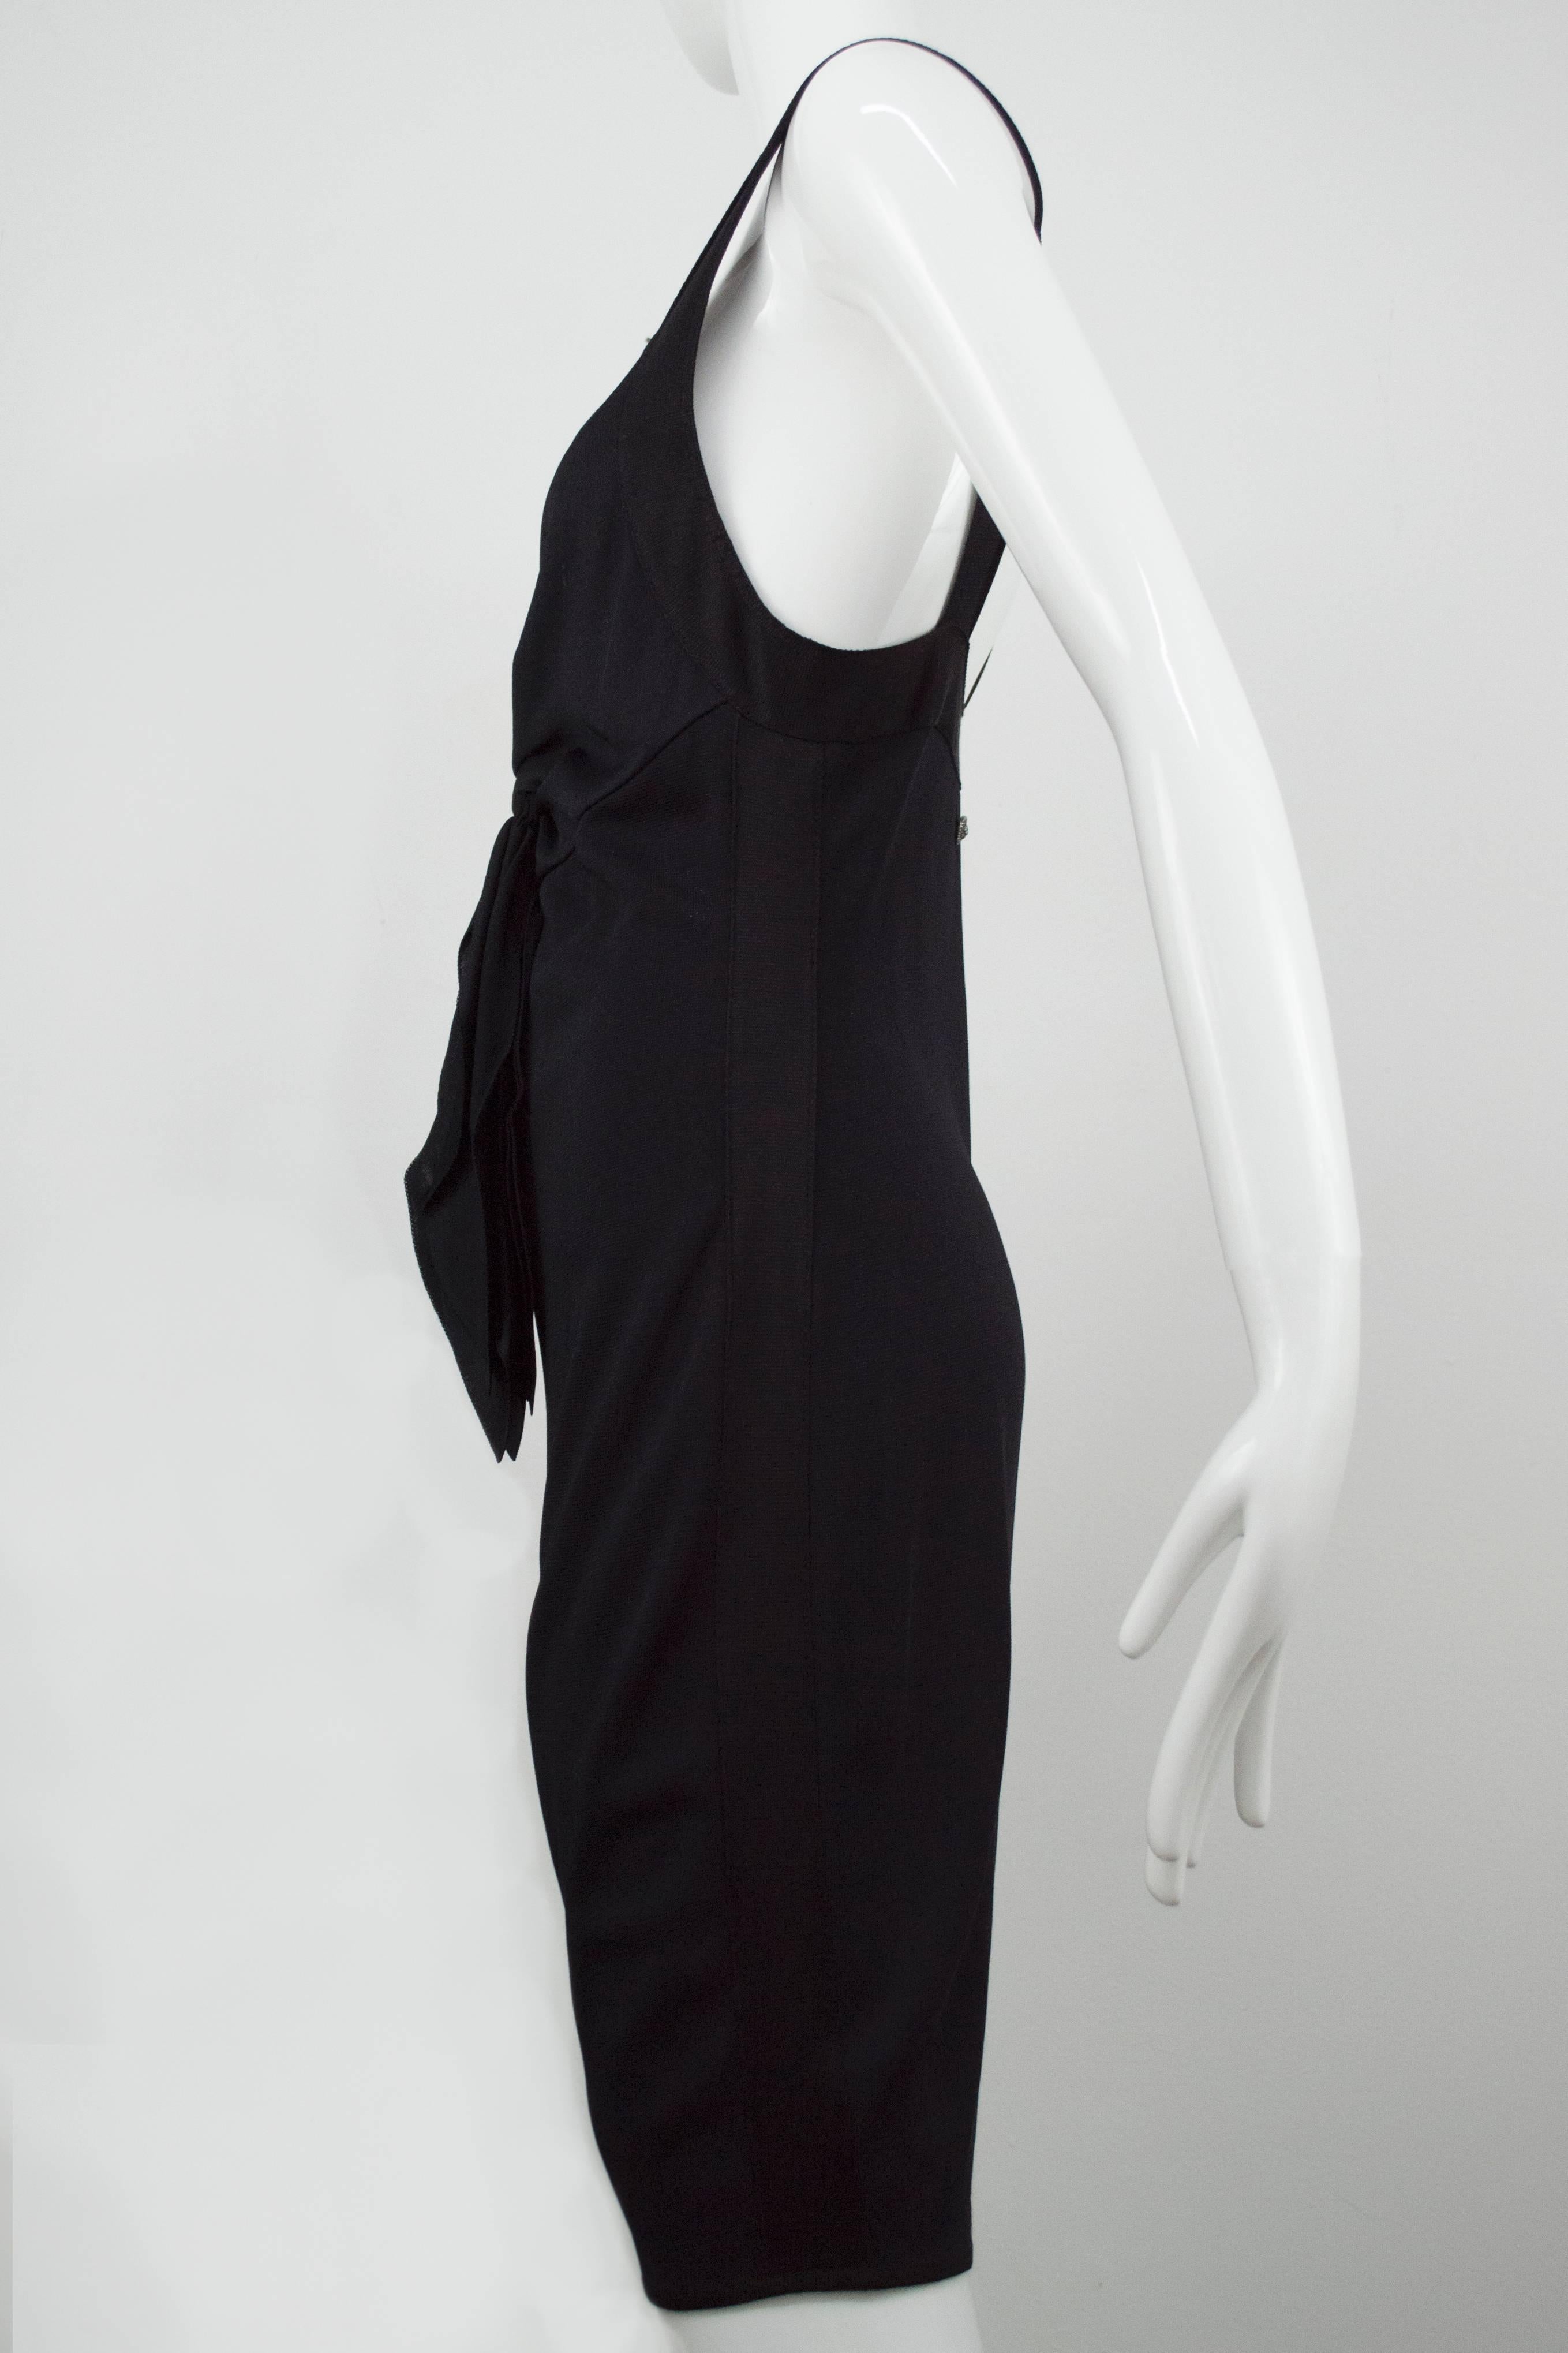 Women's Chanel Black Jersey Fitted Cocktail Dress 42